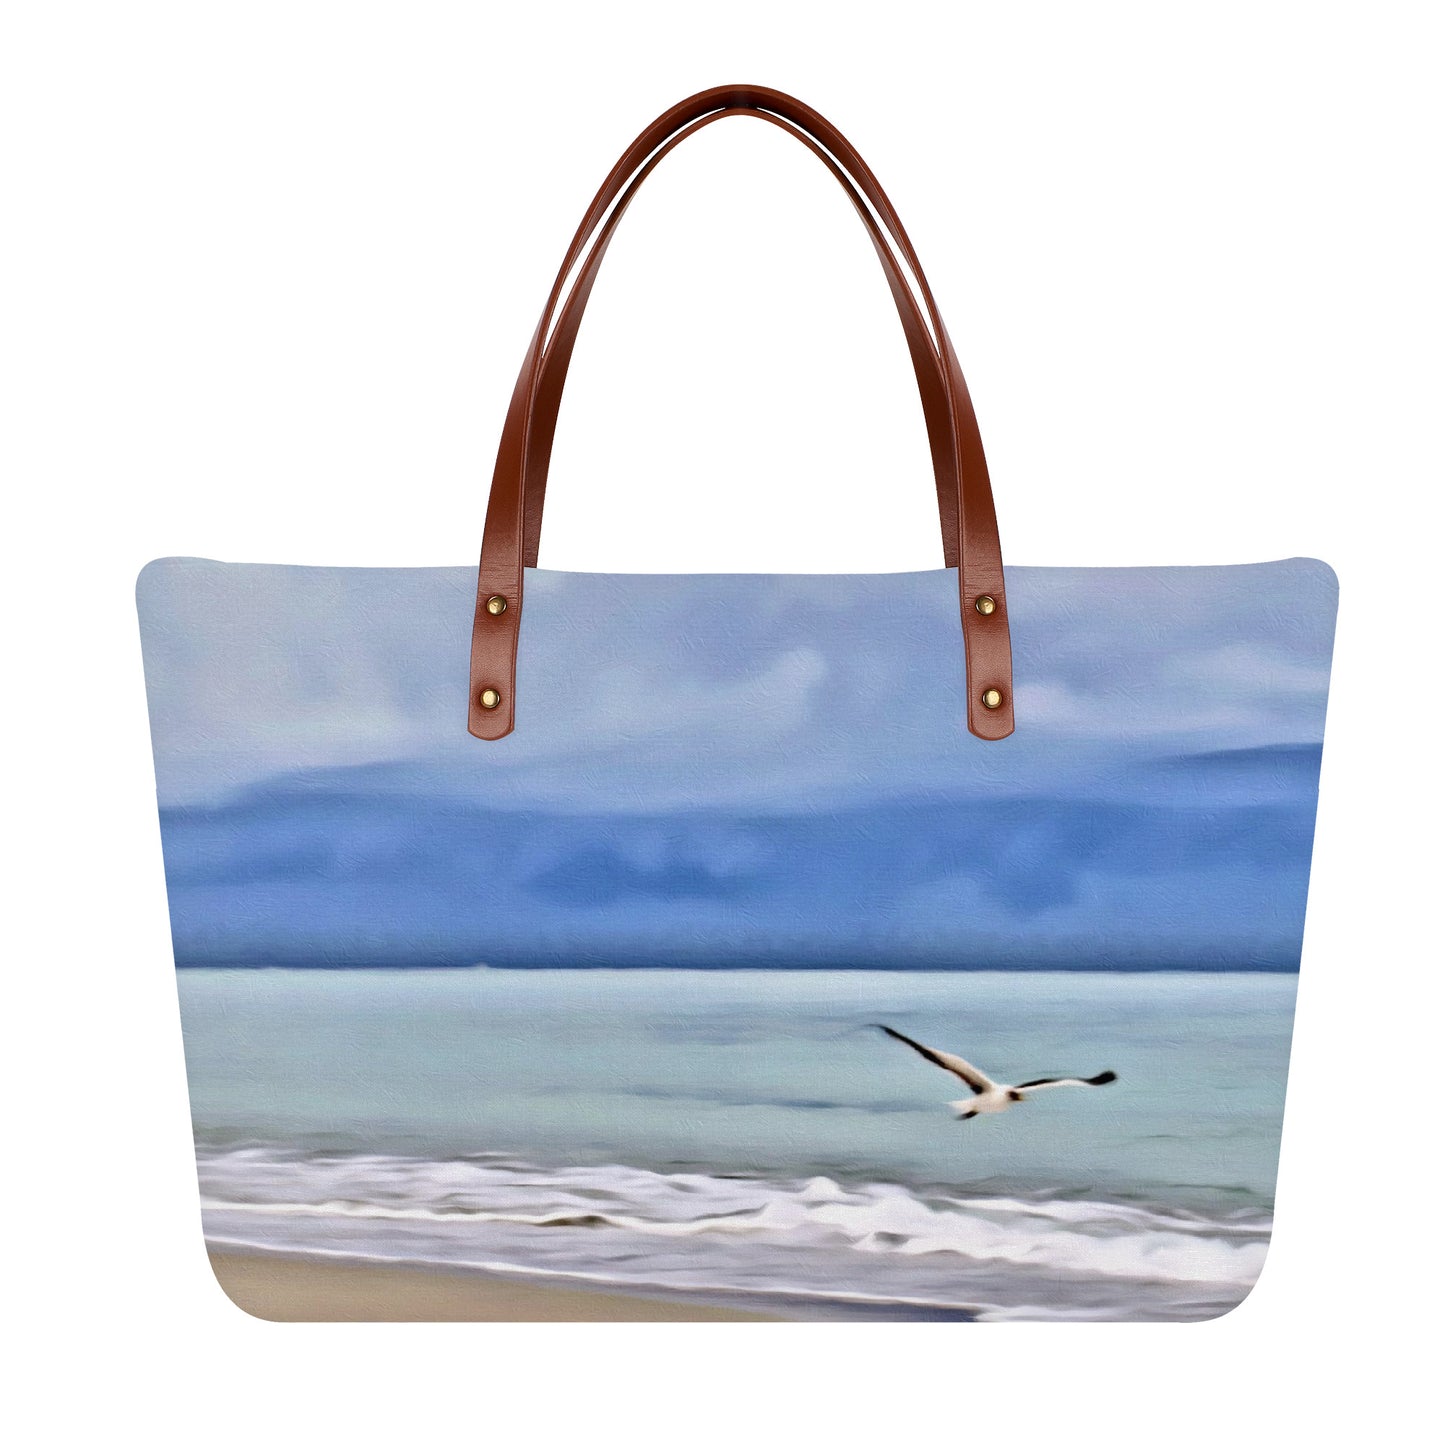 Peaceful Fight over the Ocean - Everyday Tote Bag